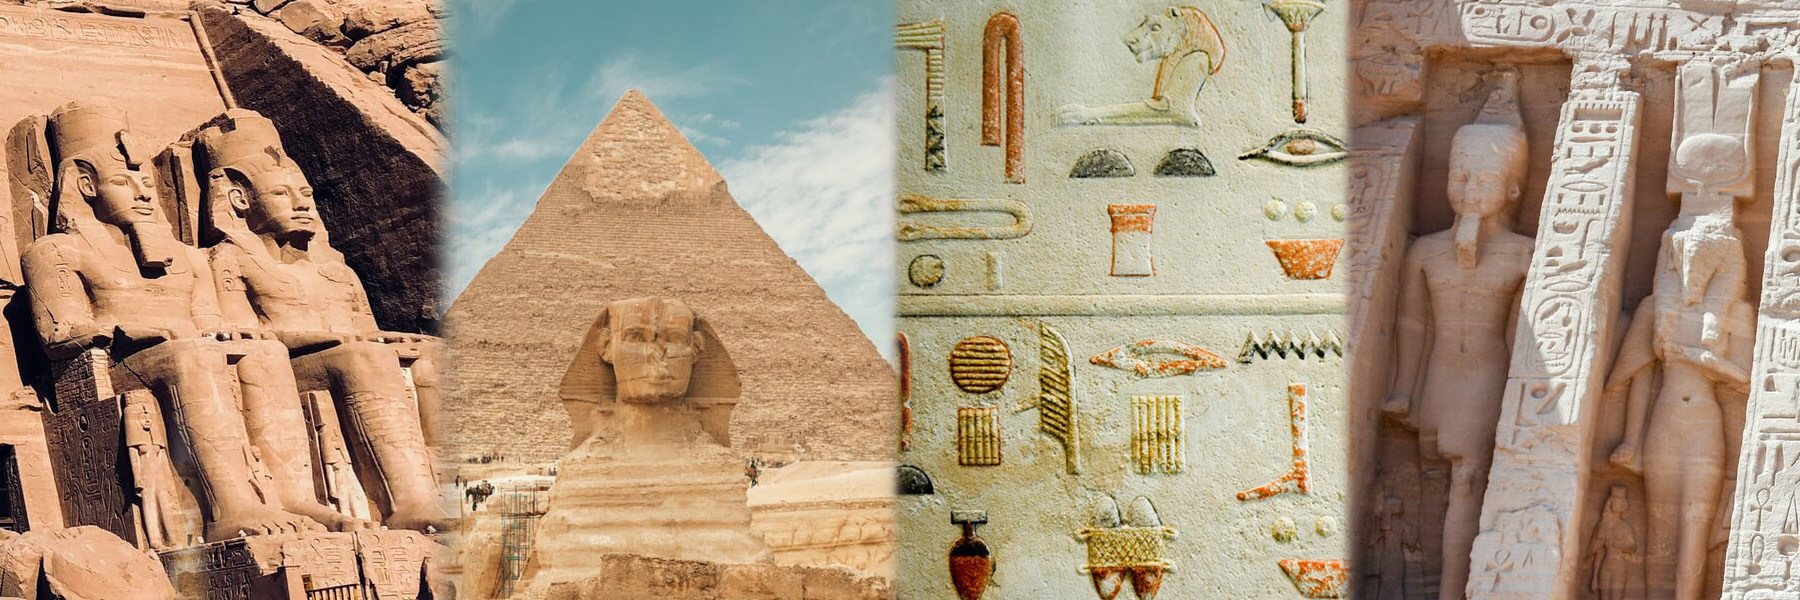 A collage of Egyptian statues, an Egyptian Pyramid, a wall of hieroglyphic text, and more Egyptian statues.